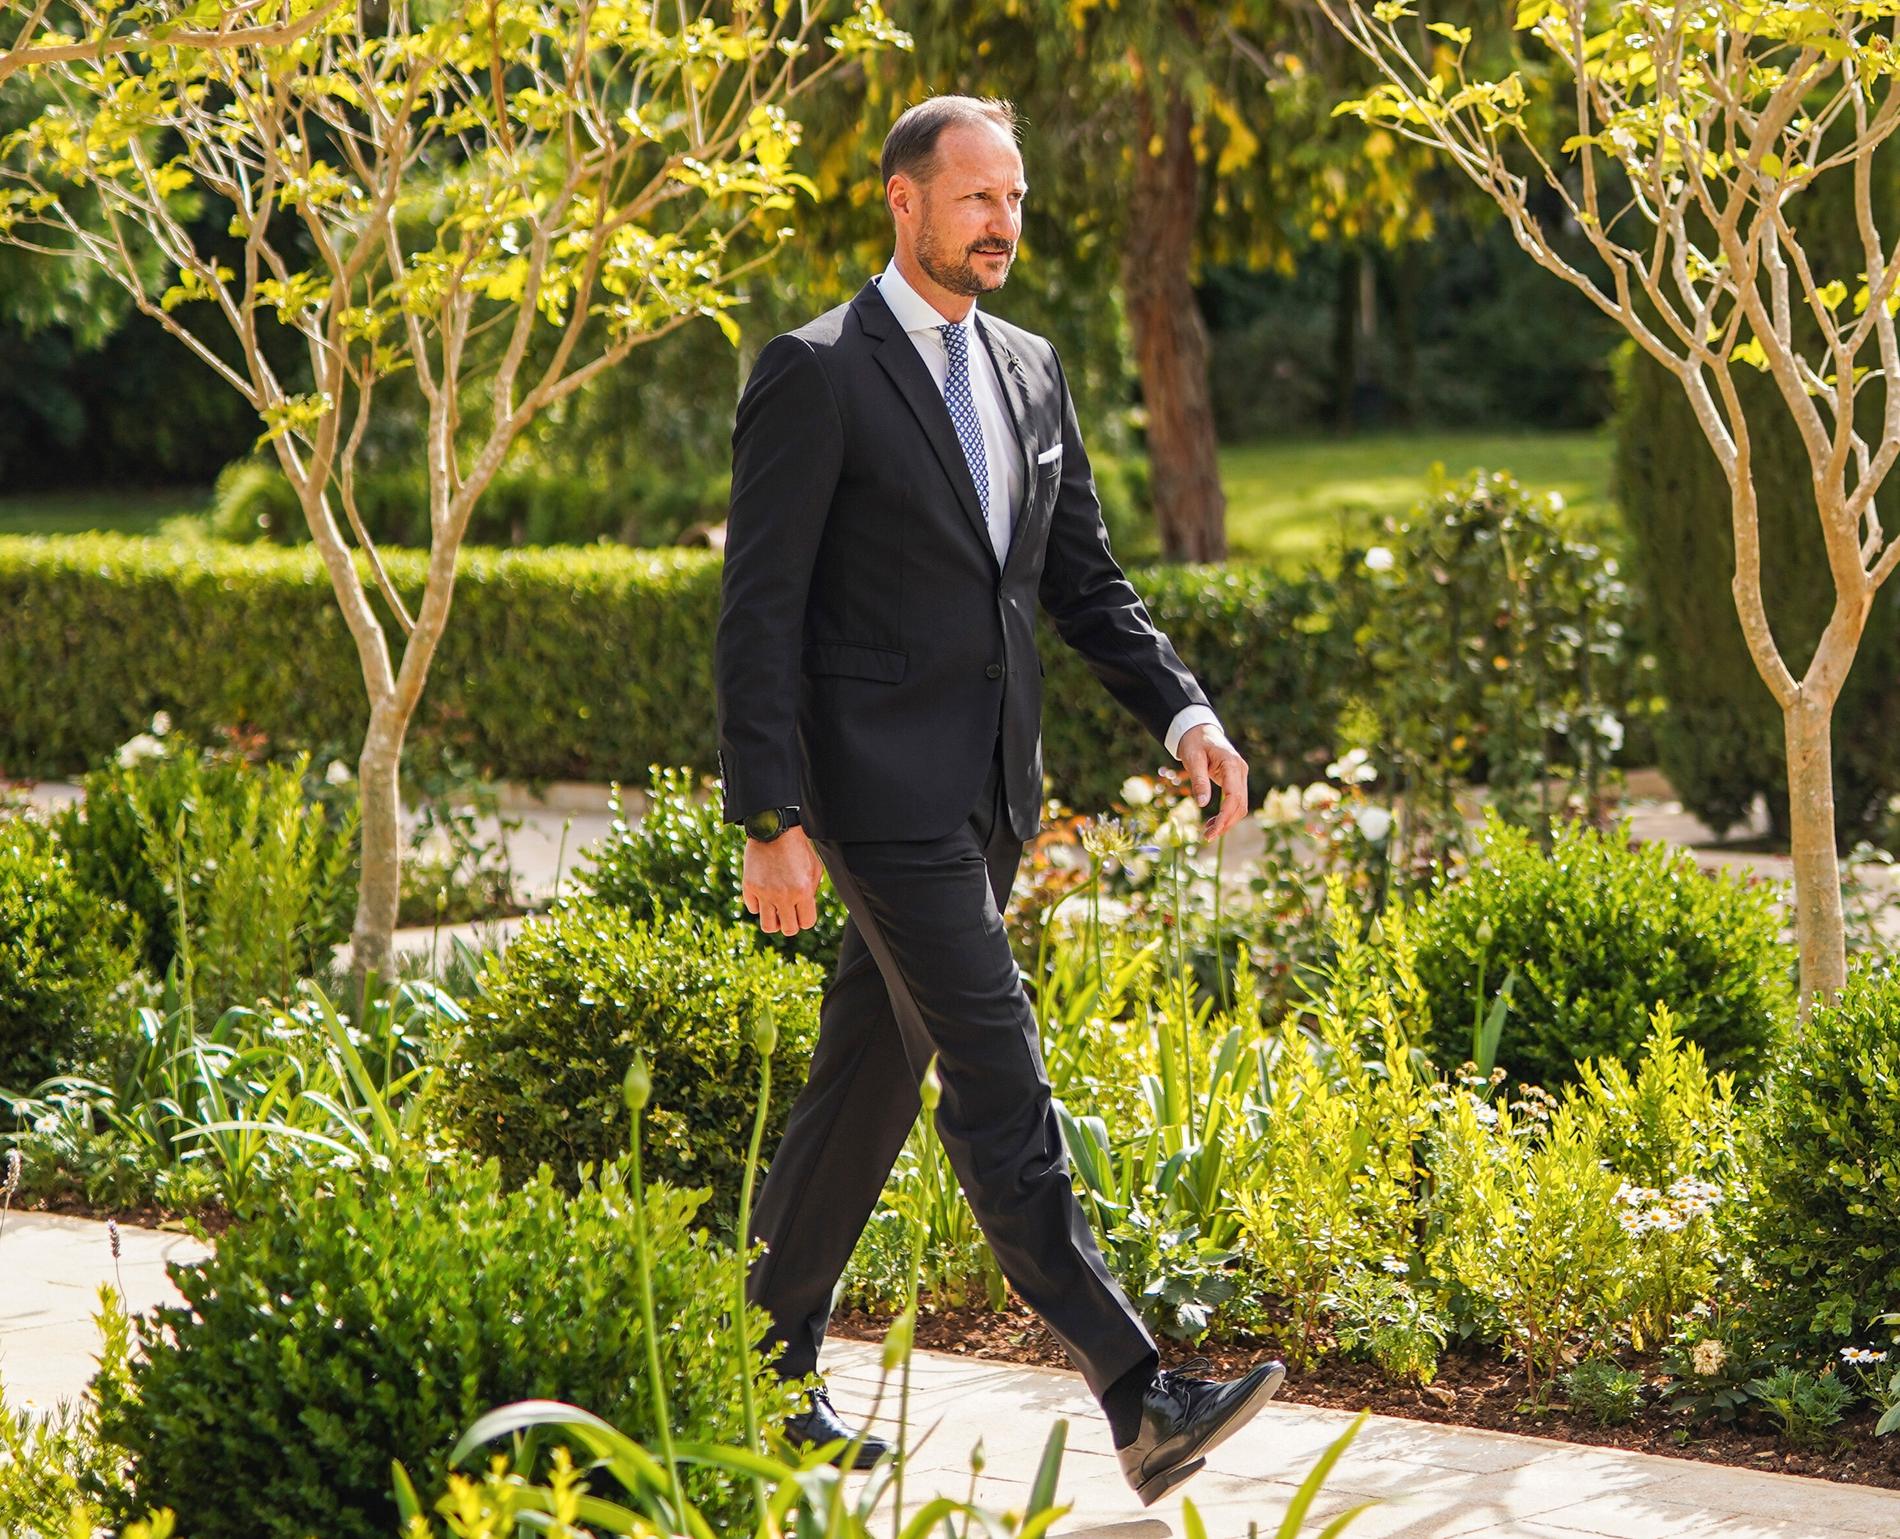 Crown Prince Haakon appeared in a luxurious royal wedding